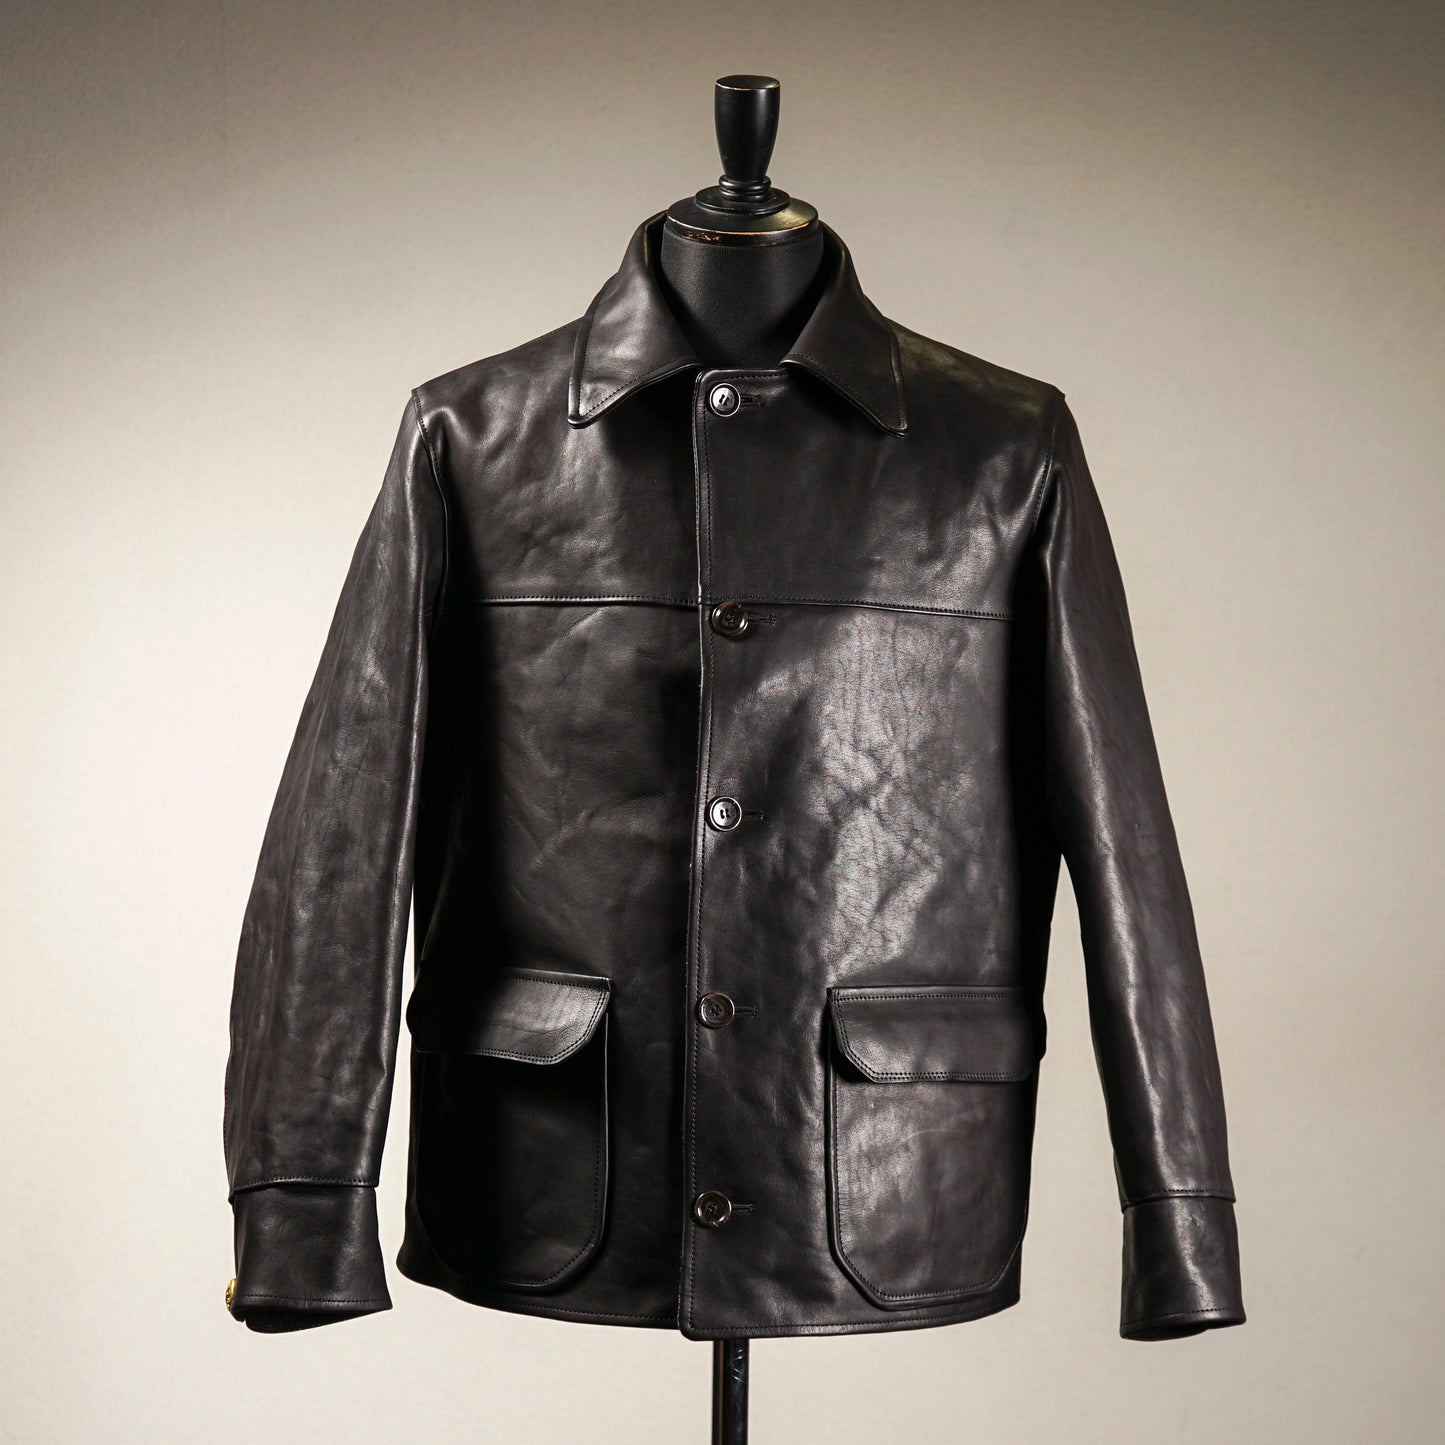 GOODFIELD "OLD OIL LEATHER" / BYGH-22-AW-01